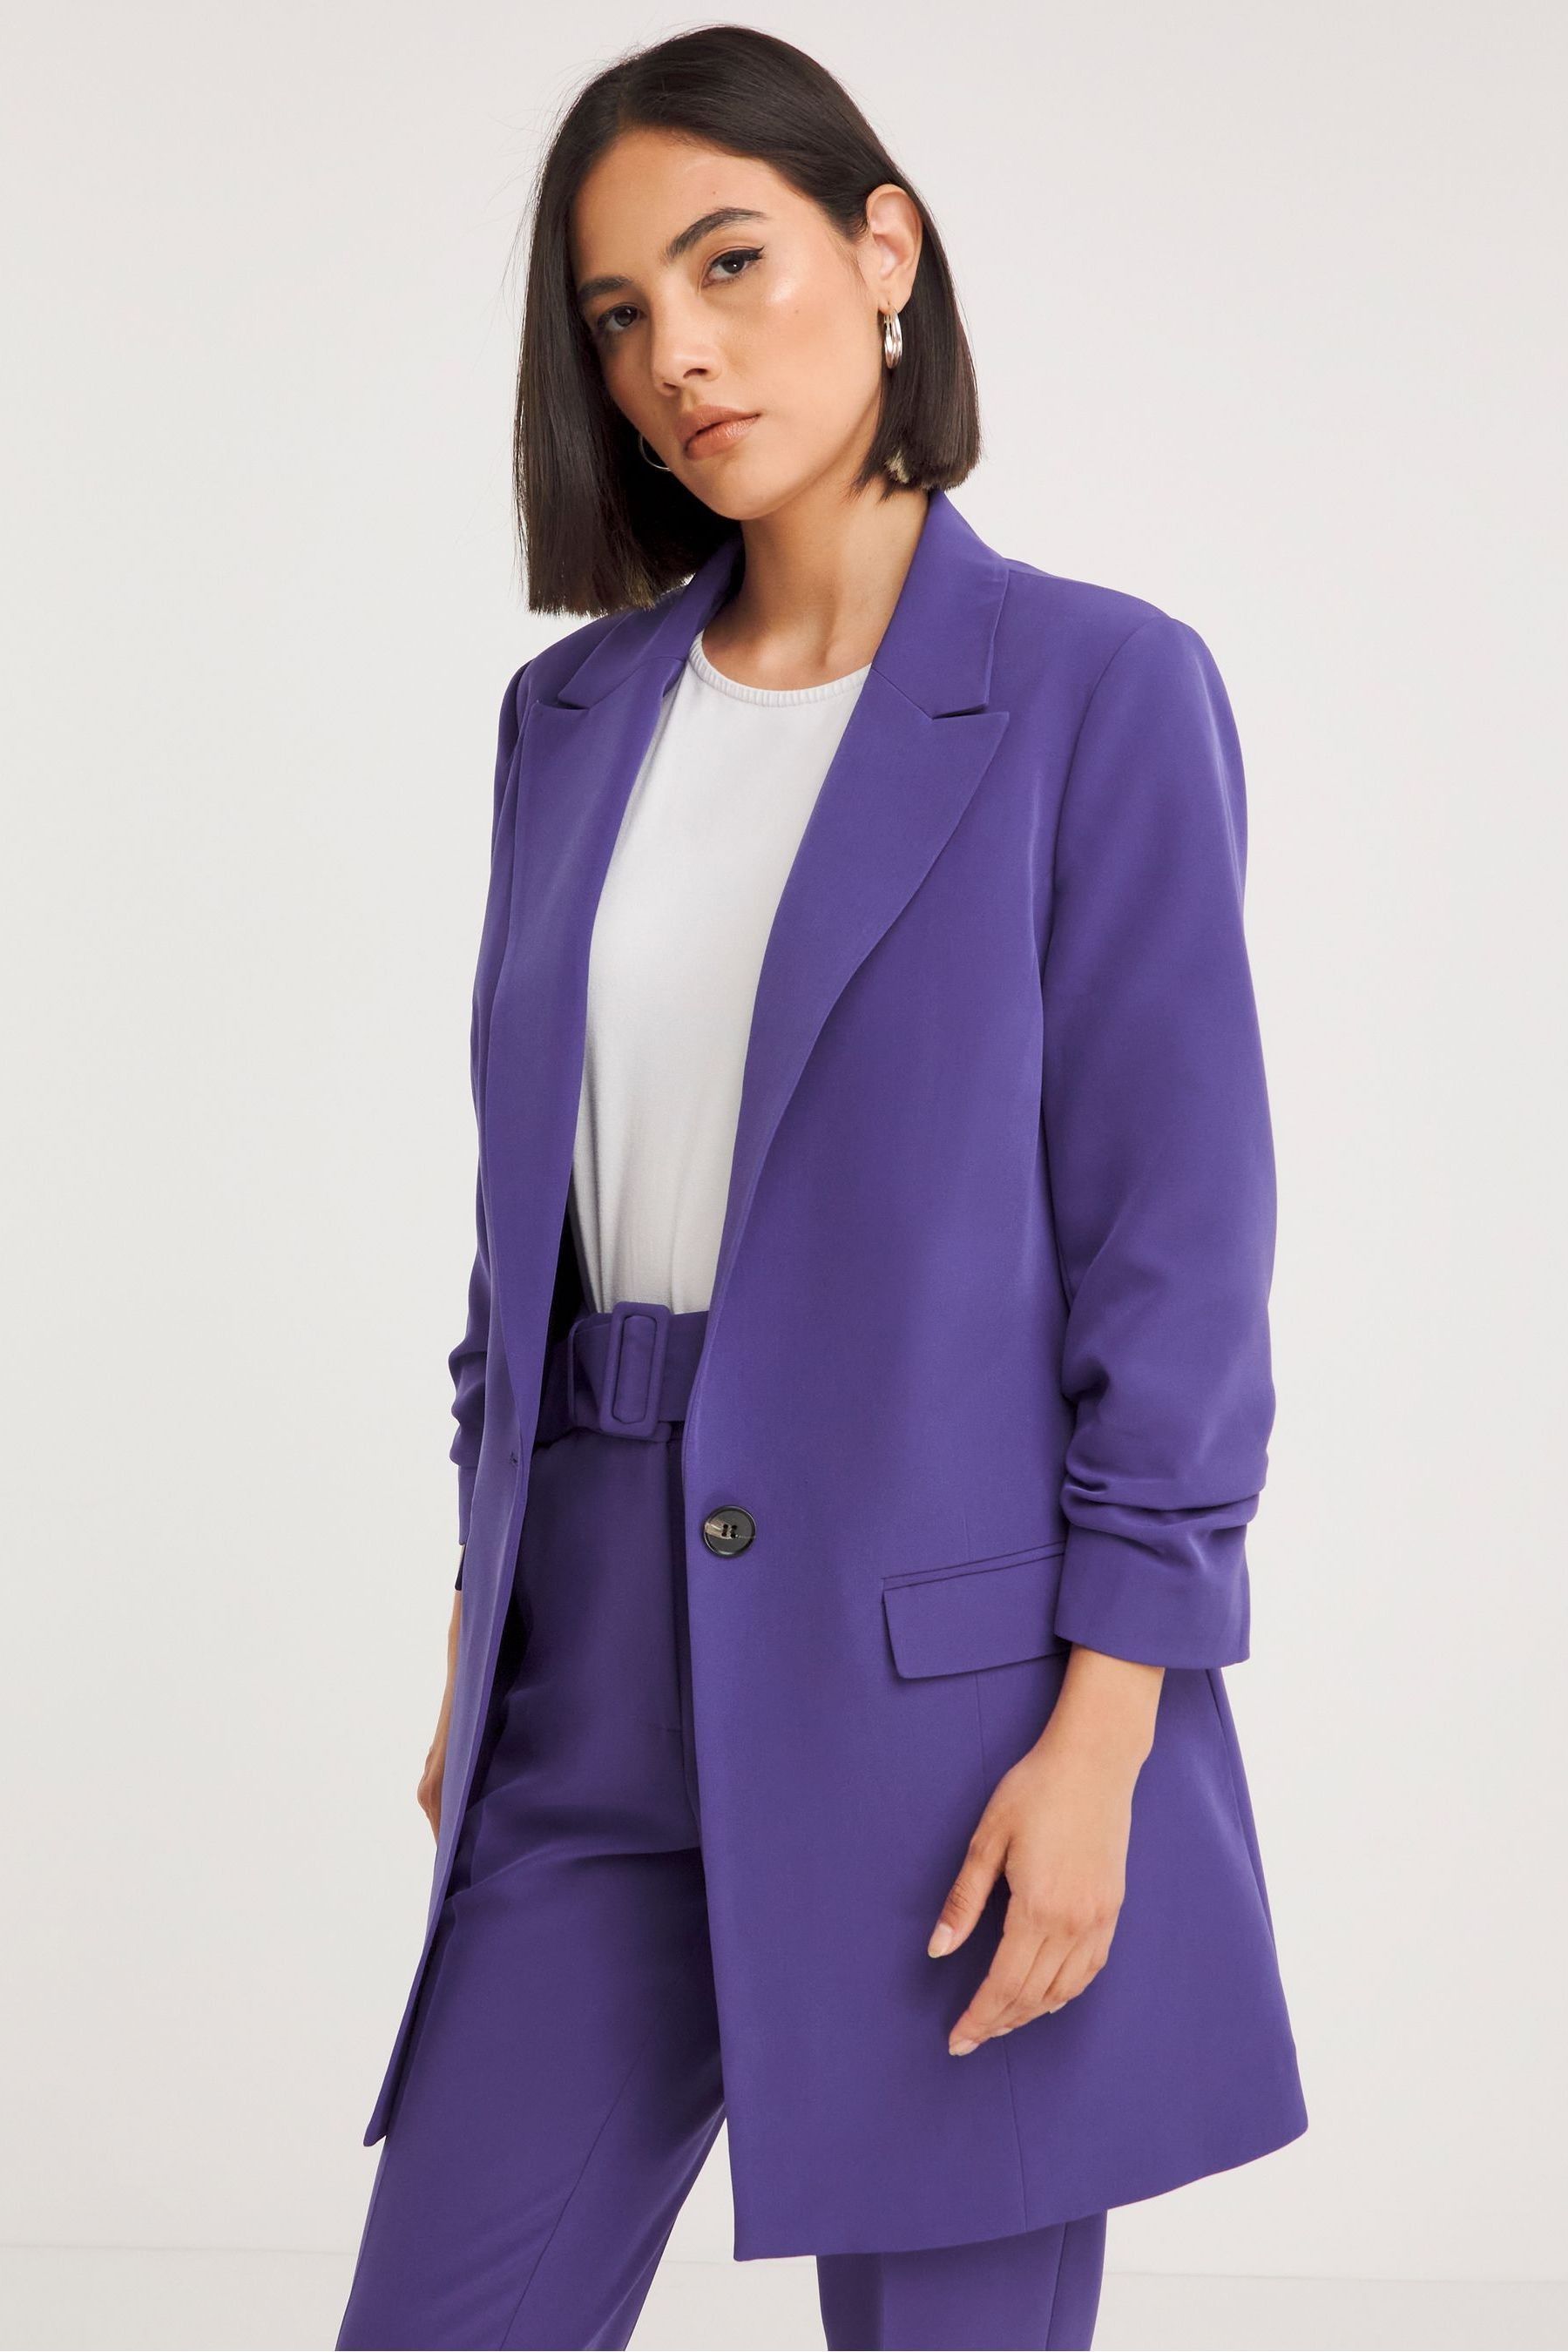 Buy Simply Be Purple Ruched Sleeve Blazer from the Next UK online shop